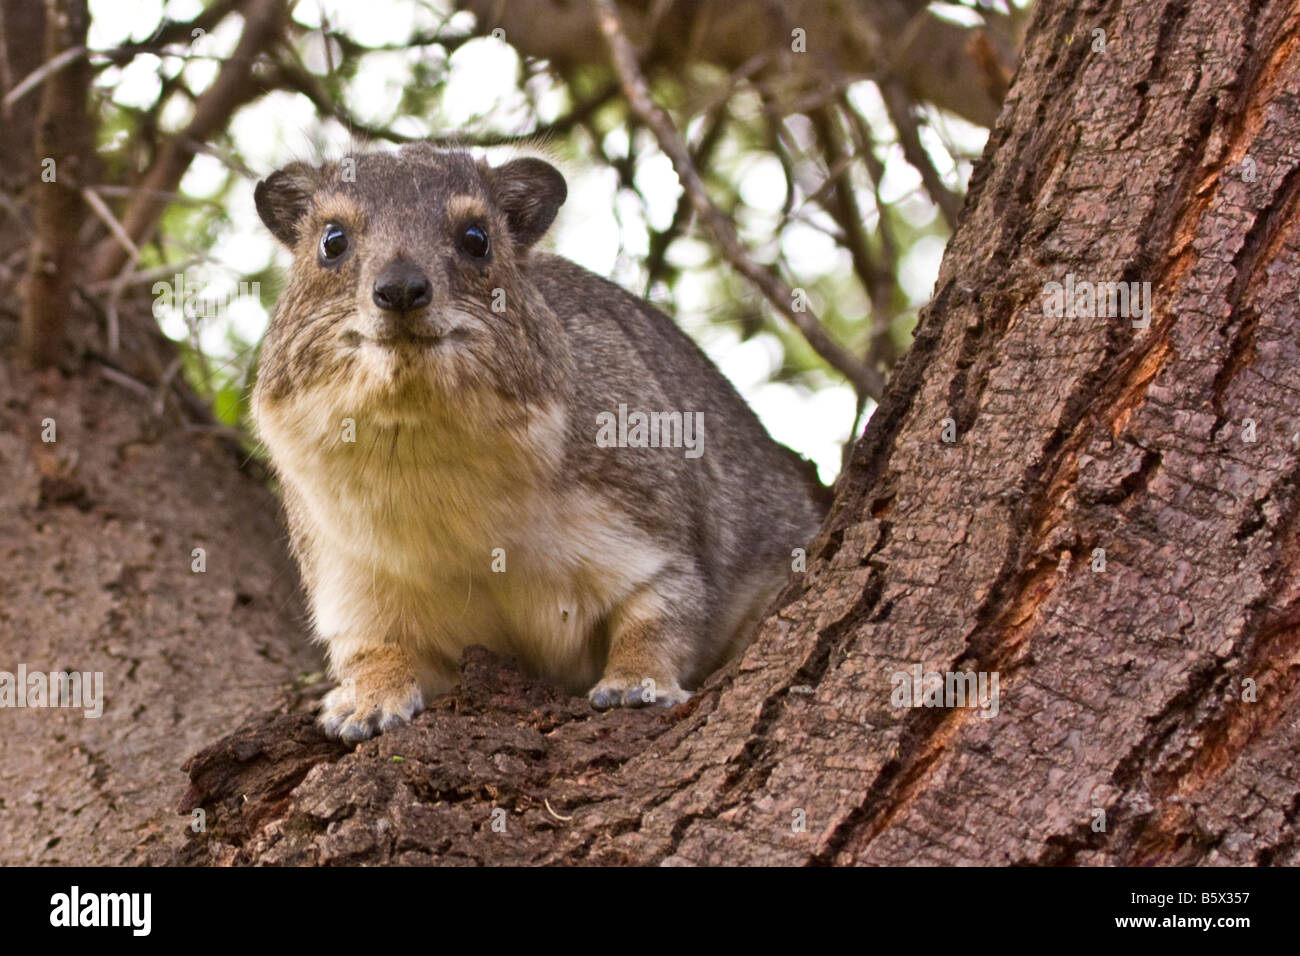 A Hyrax in a tree Stock Photo